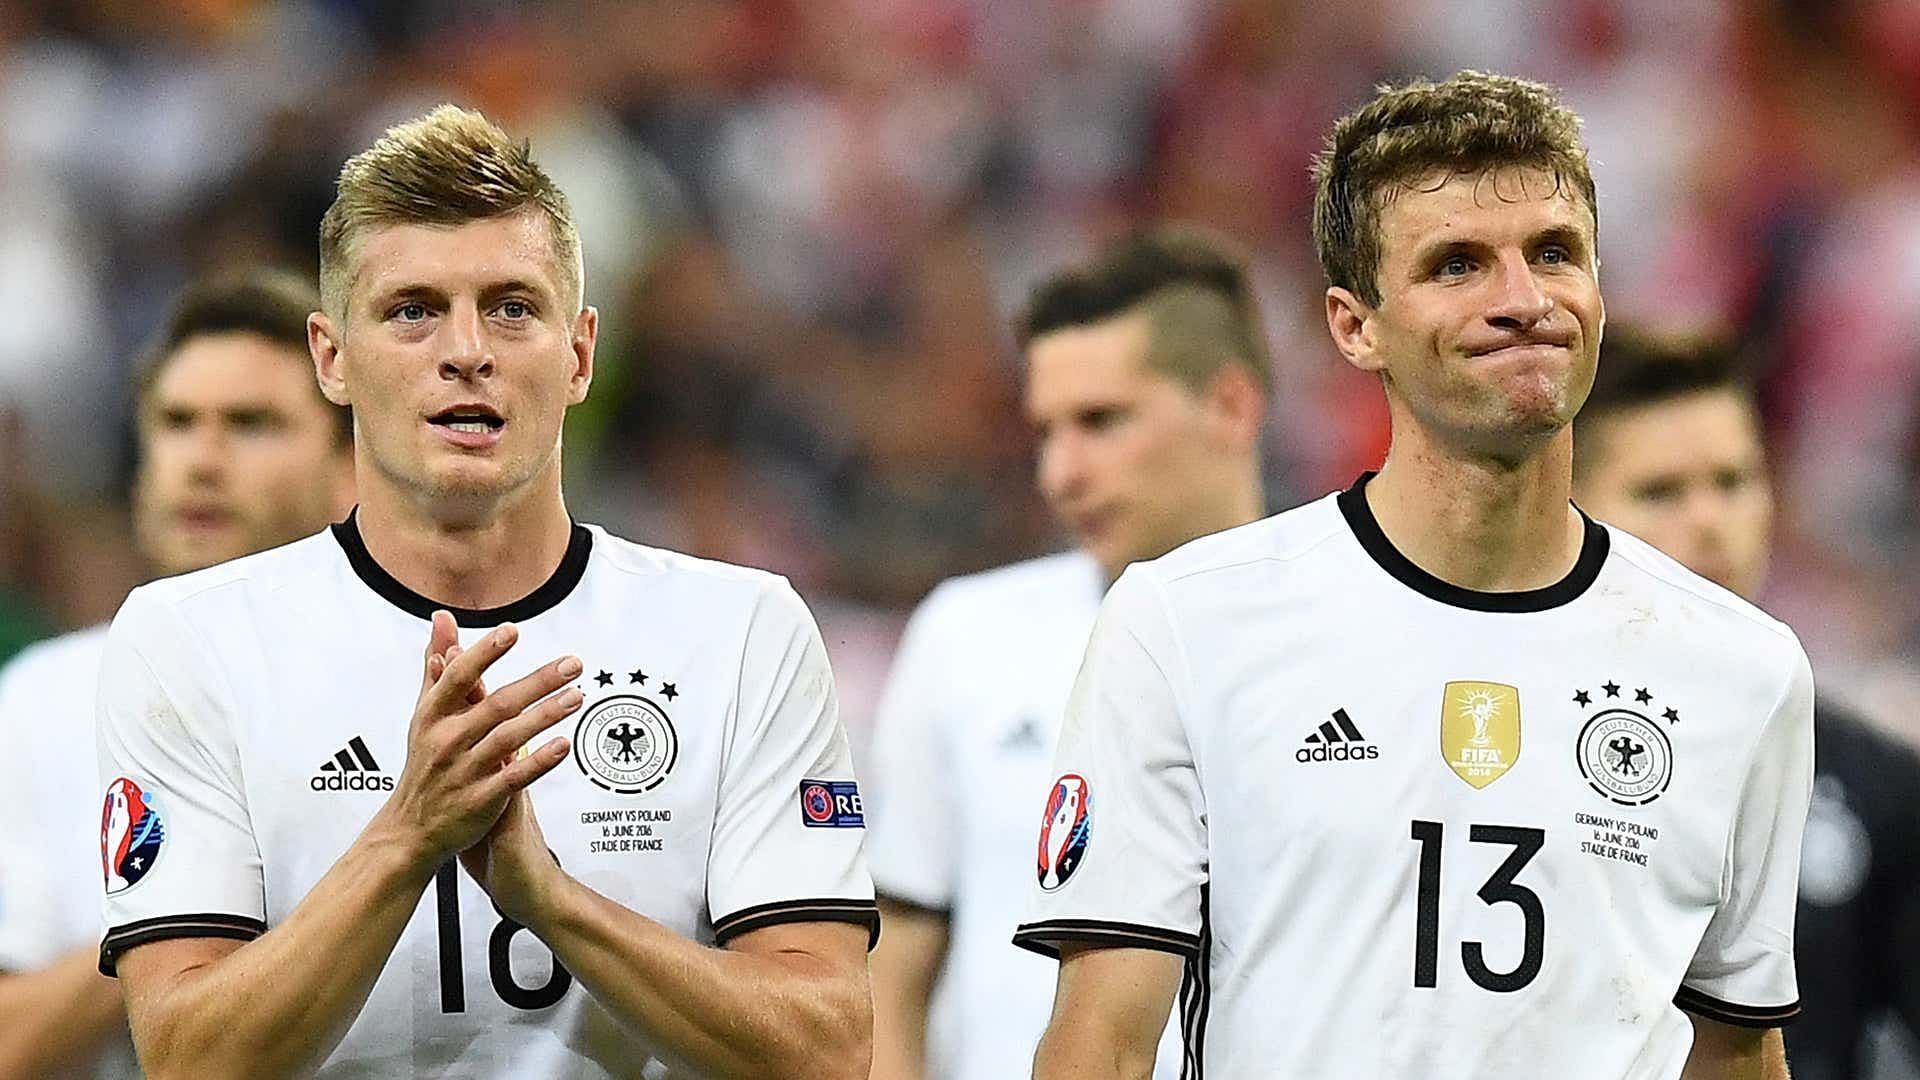 Toni Kroos (left) and Thomas Muller have been exceptional for Germany.